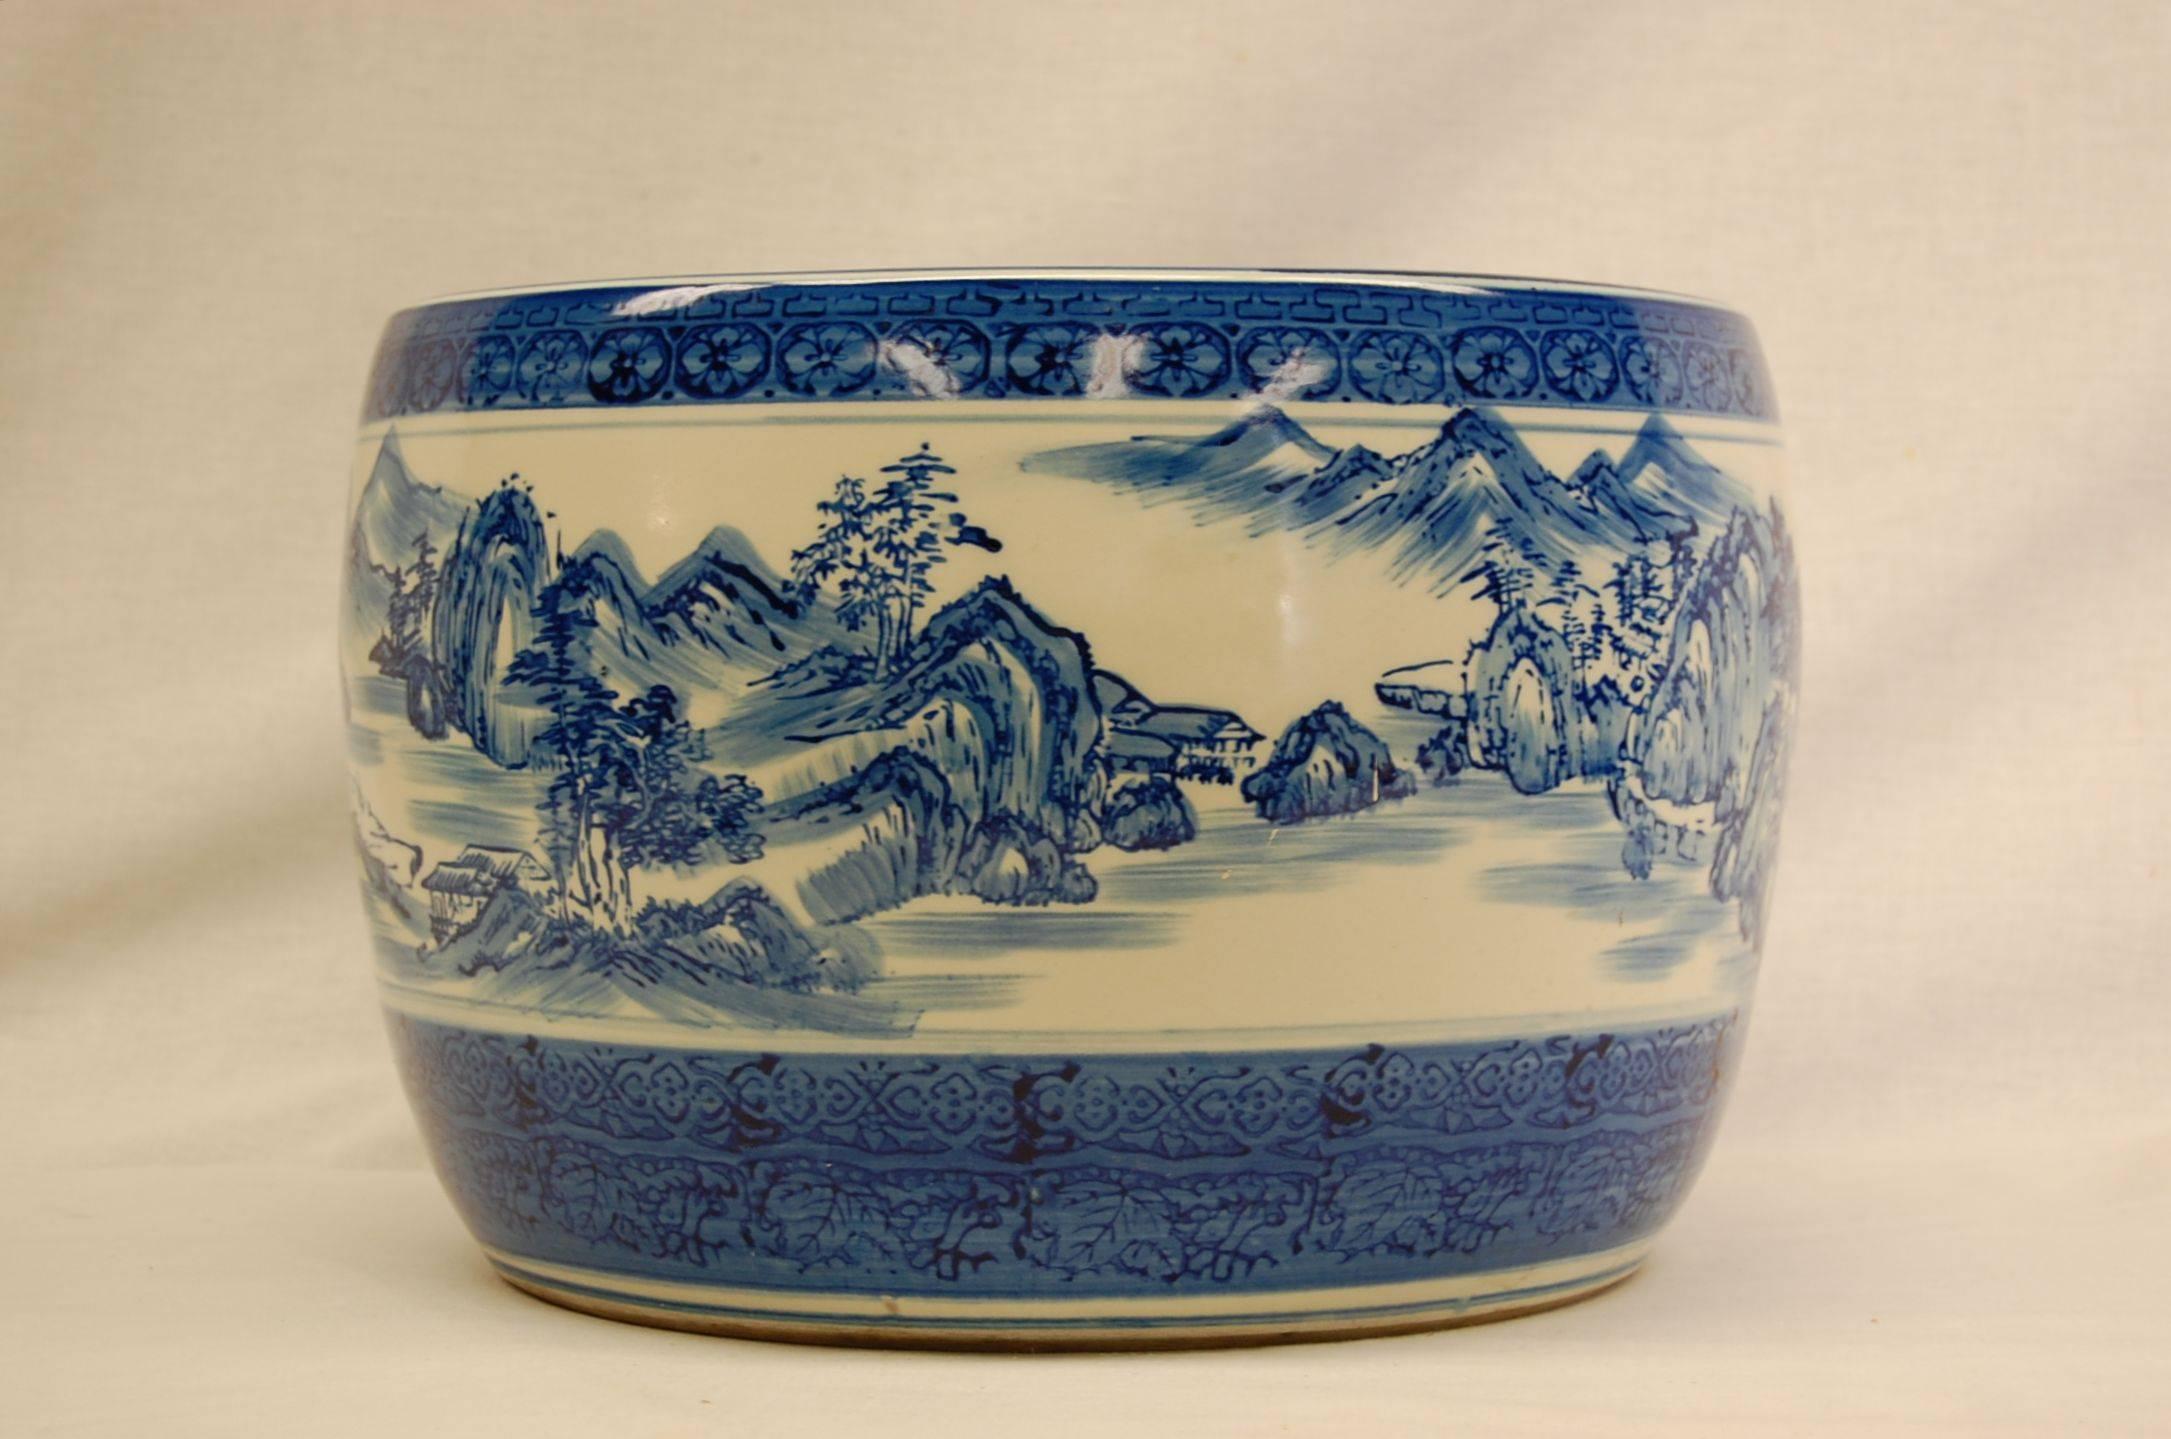 Beautiful blue and white glazed urn decorated with mountain scenes, trees and lakes in perfect condition.